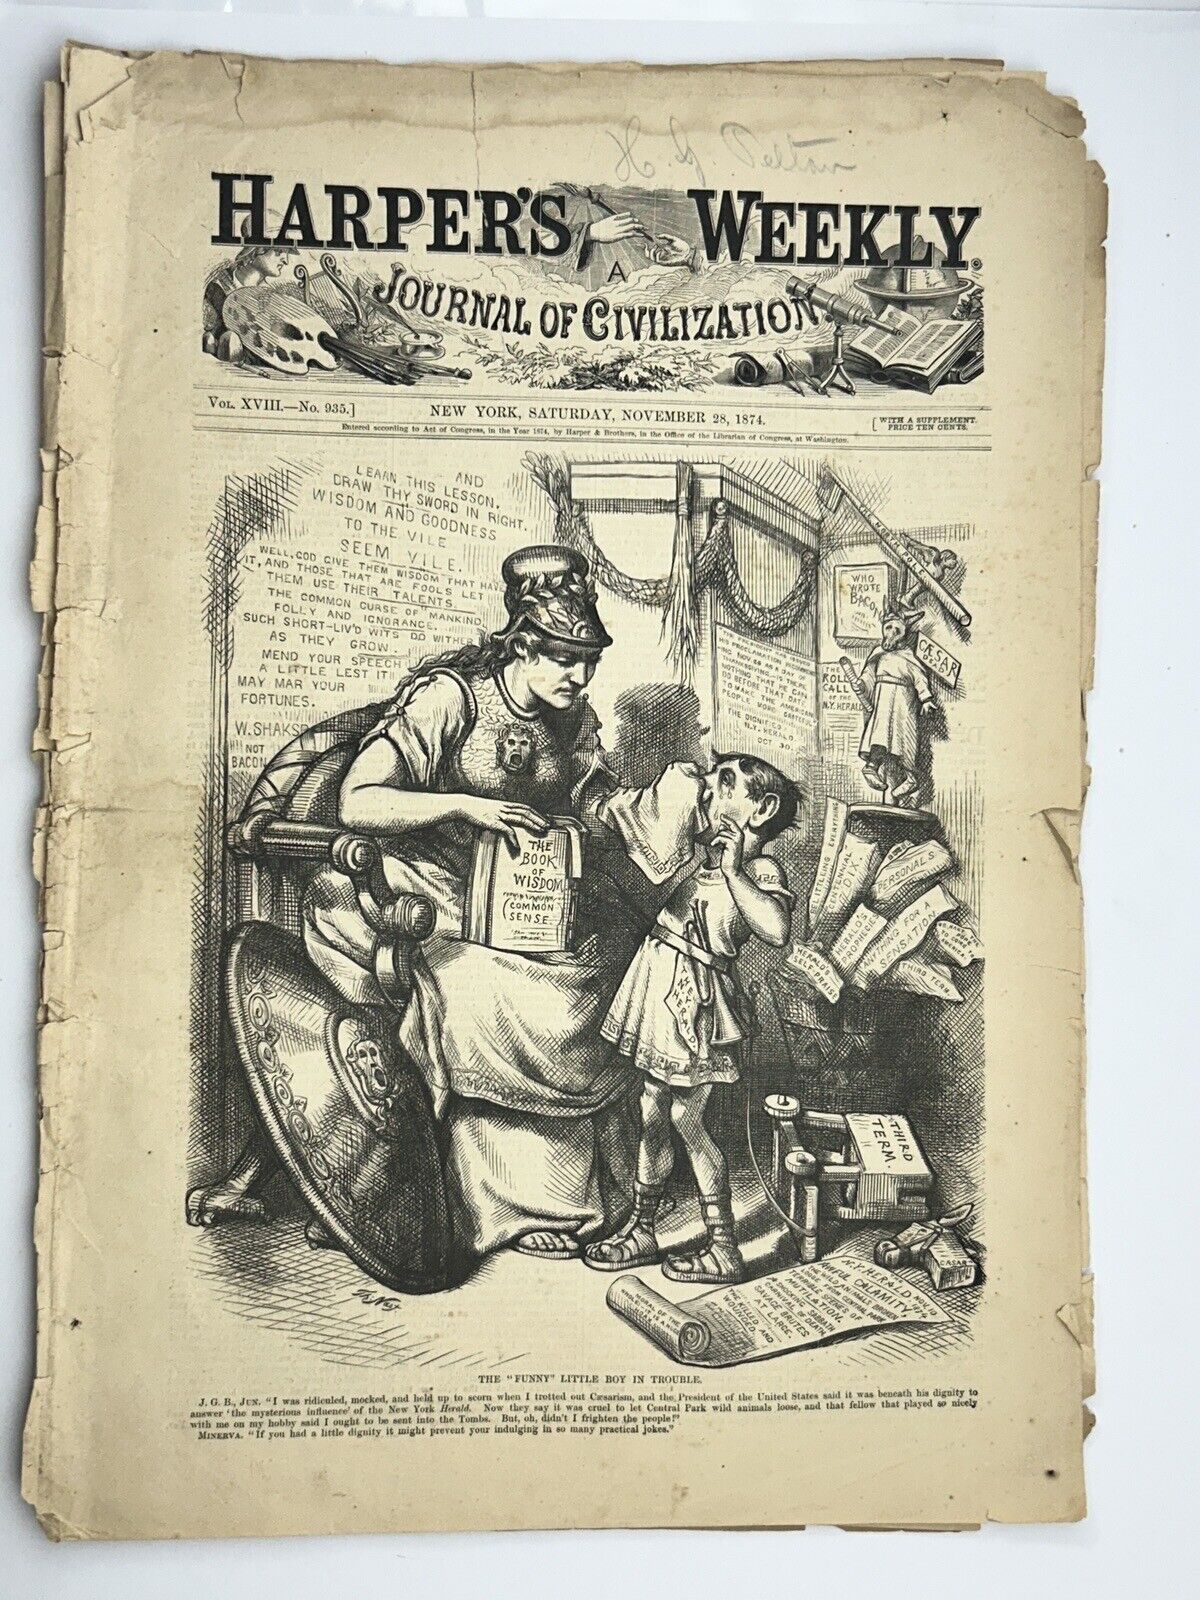 Harper's Weekly - New York - May 31, 1873 - Native Americans - Cpt Tyson - Spain